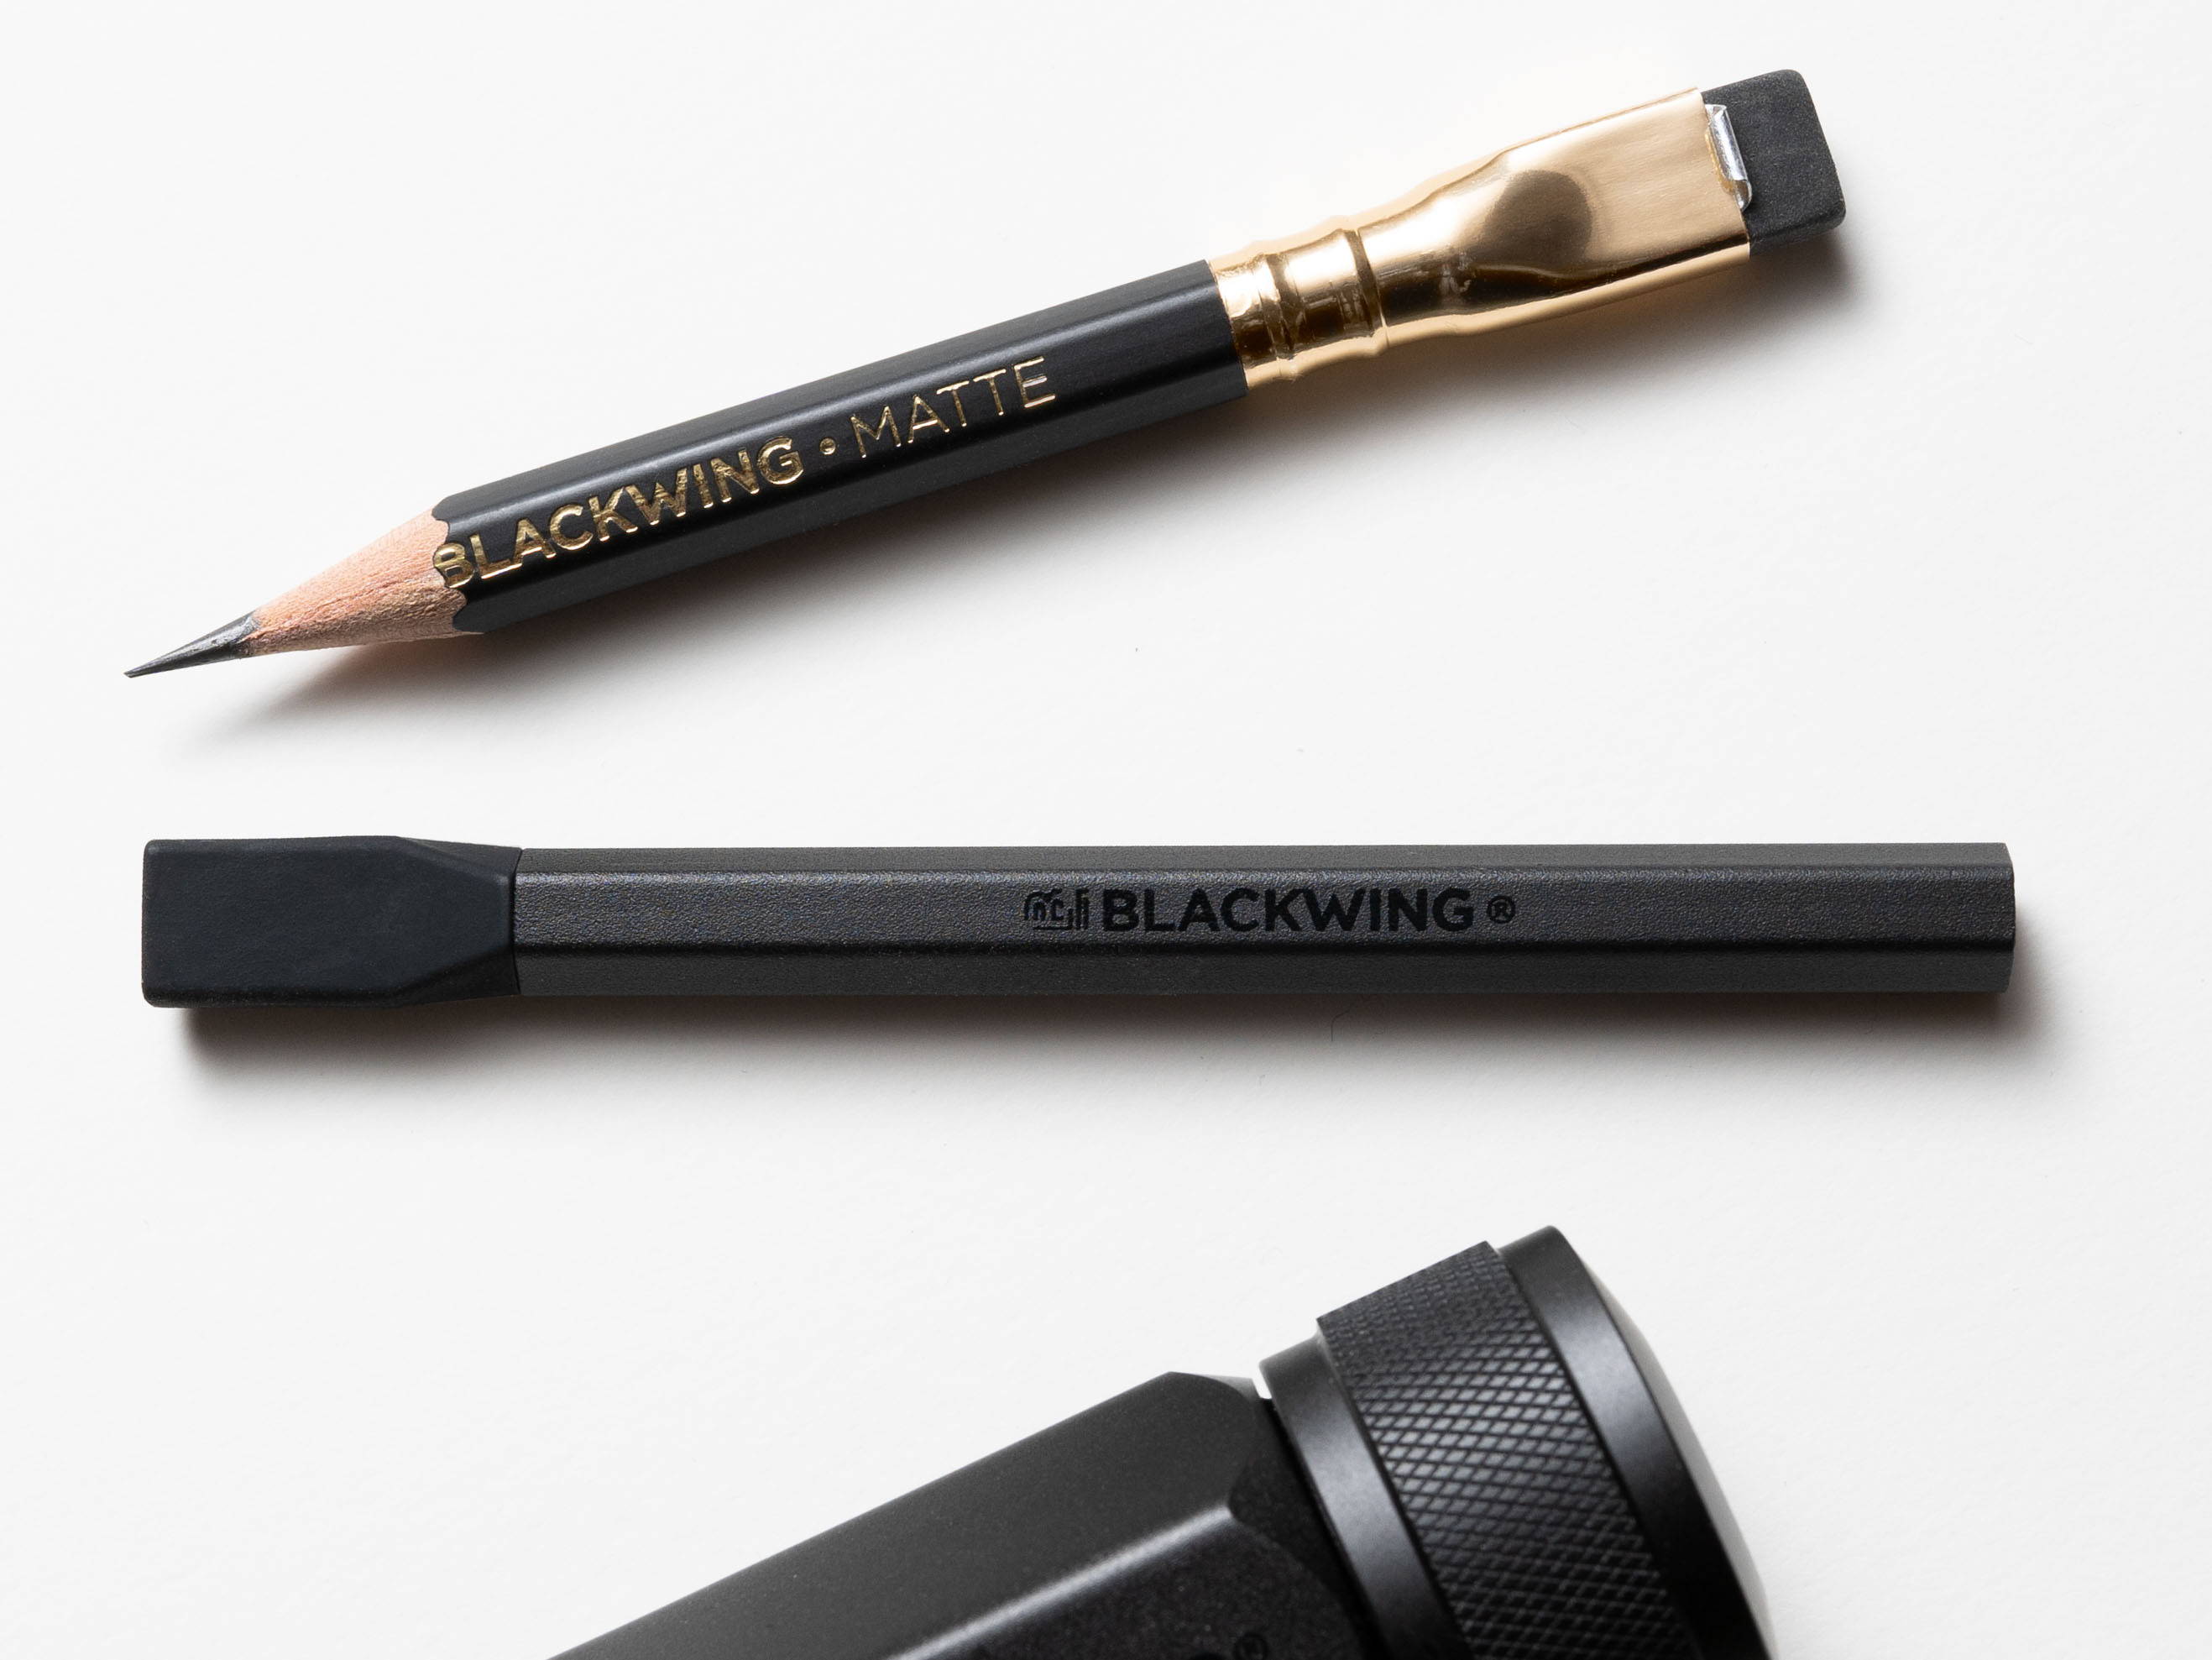 Palomino Blackwing Point Guard Matte Black - oblation papers & press